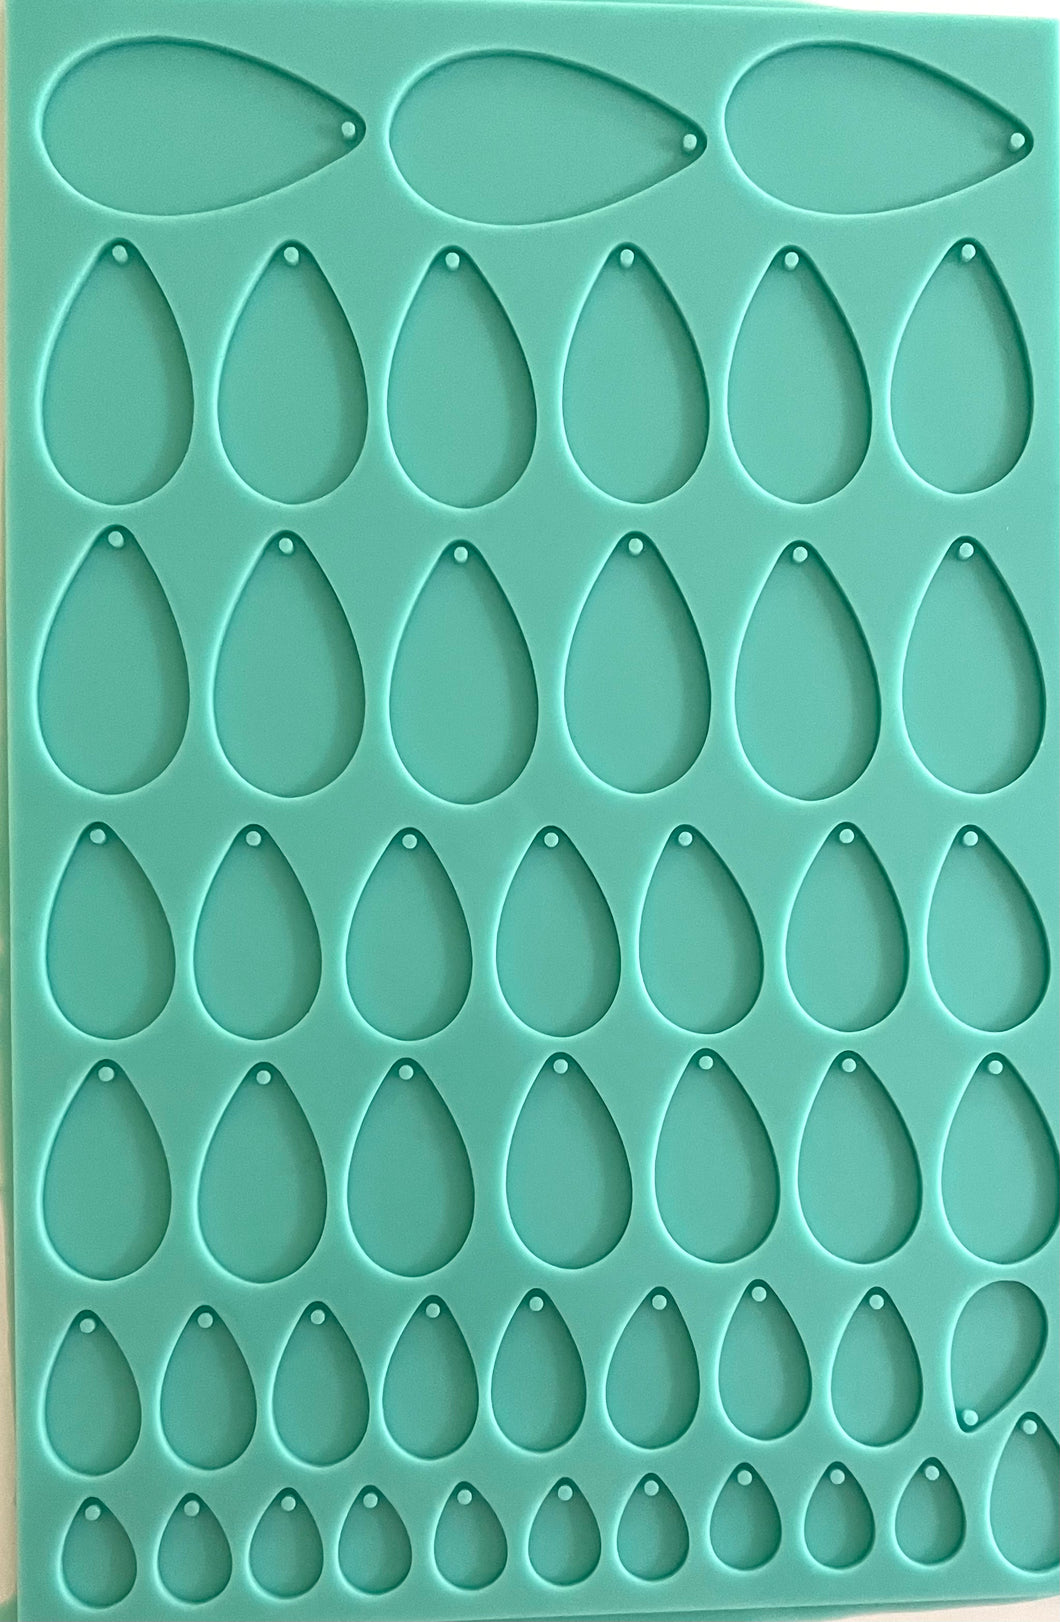 Teardrop variety- Extra large silicone mold